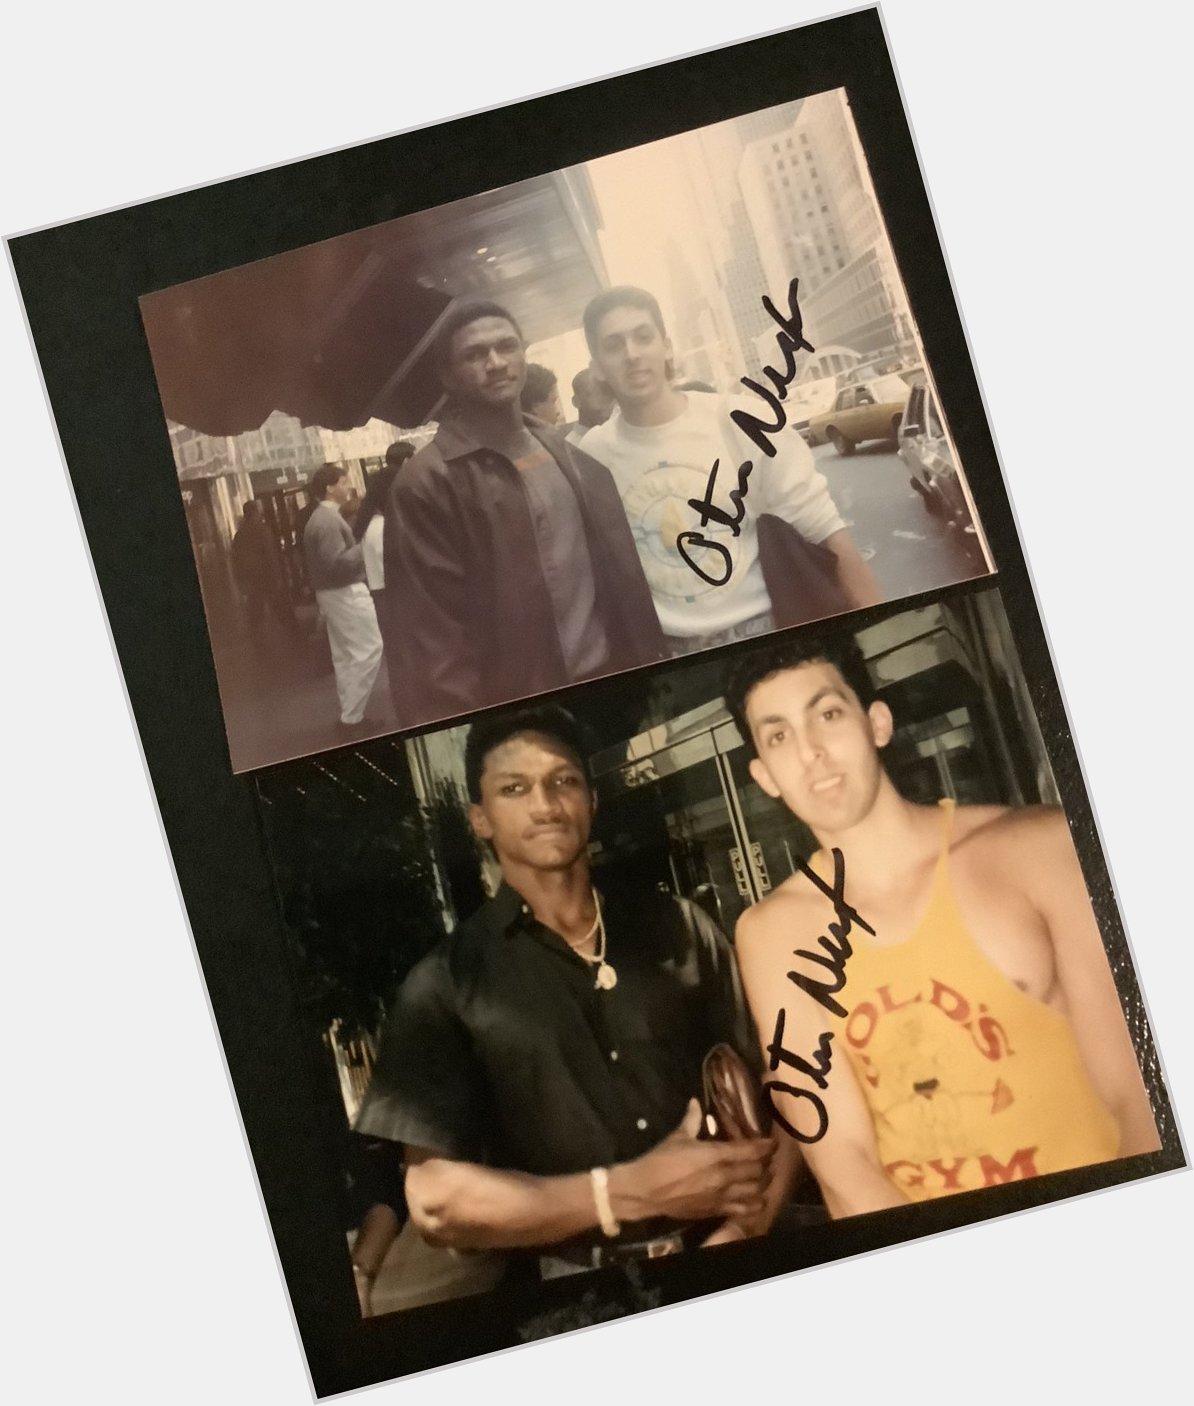  1980 s throwback pics of myself snd Otis Nixon who is such a nice guy, Happy Birthday to him 